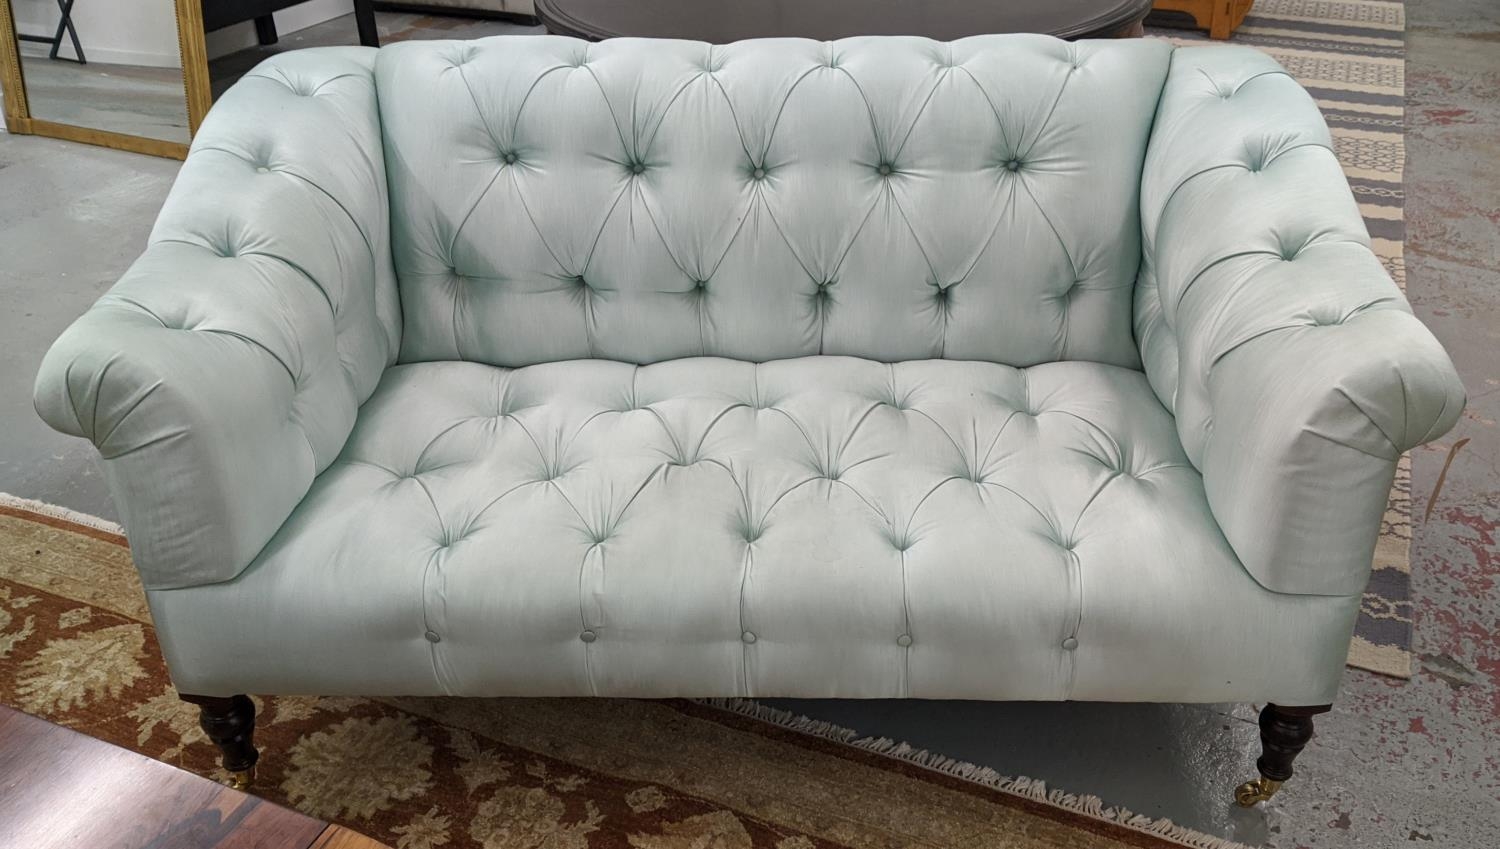 GEORGE SMITH SOFA, two seater, deep buttoned with light turquoise upholstery, 166cm W x 90cm H x - Image 8 of 8